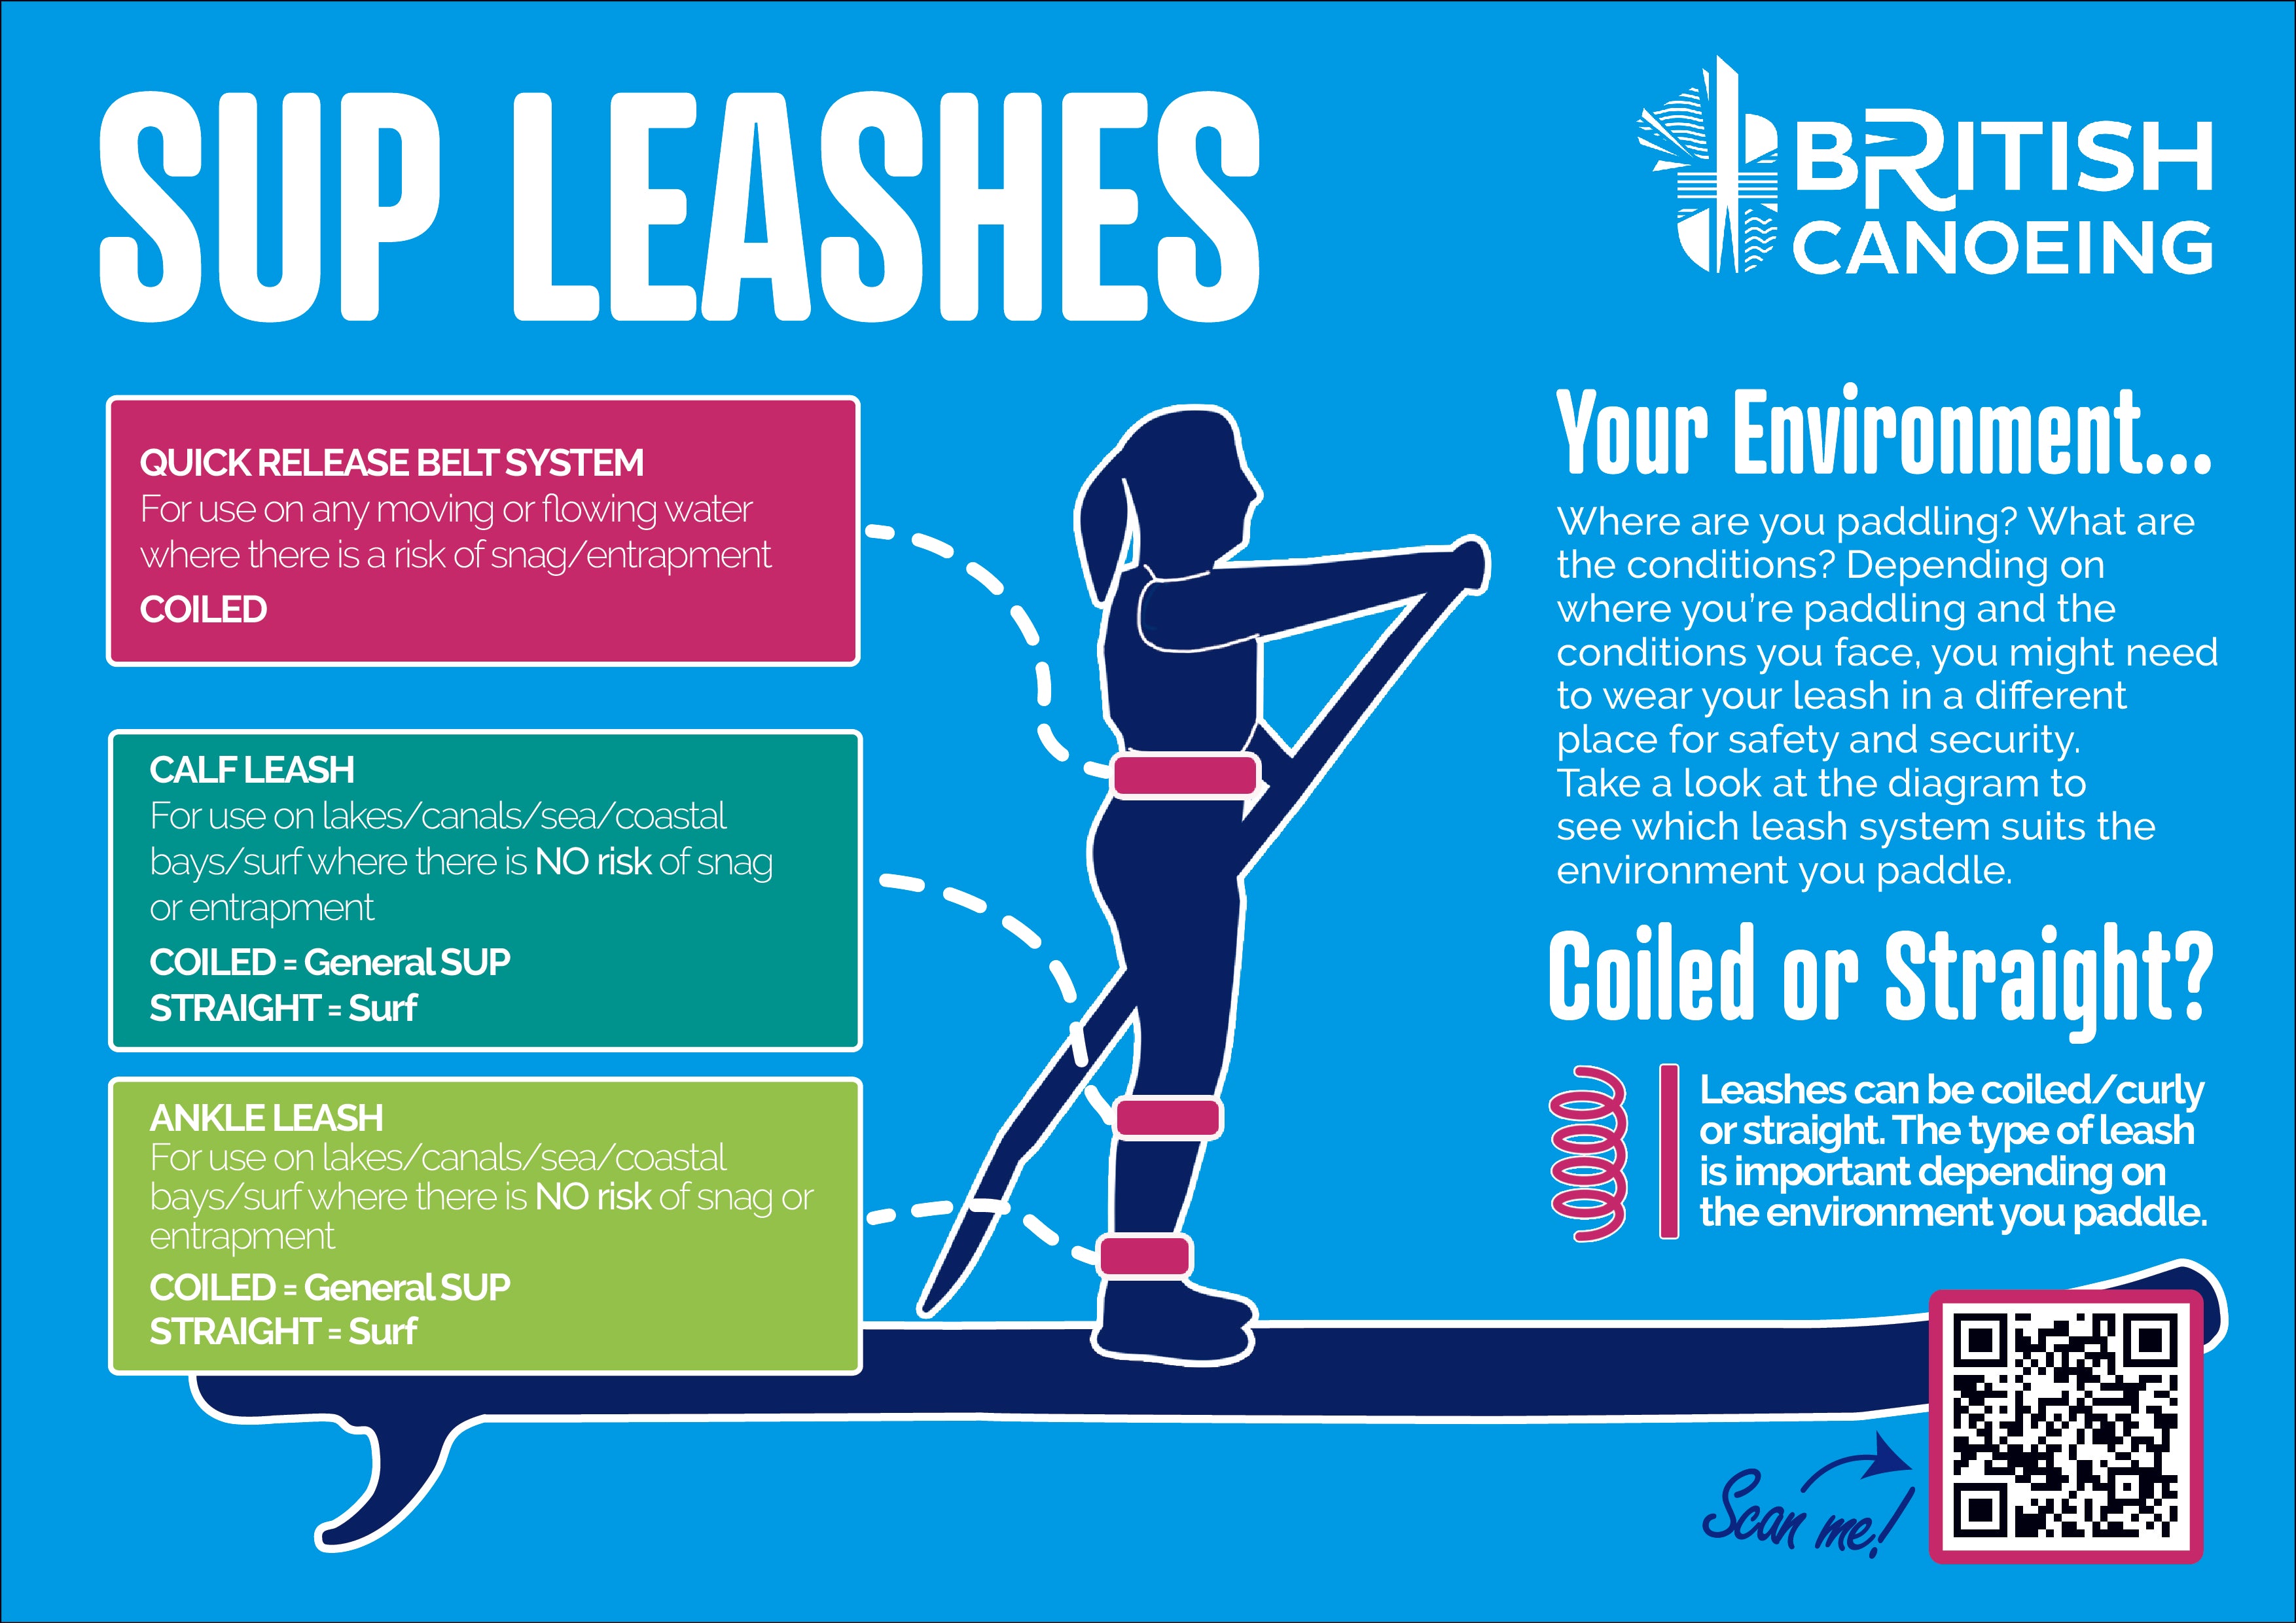 SUP leash safety infographic